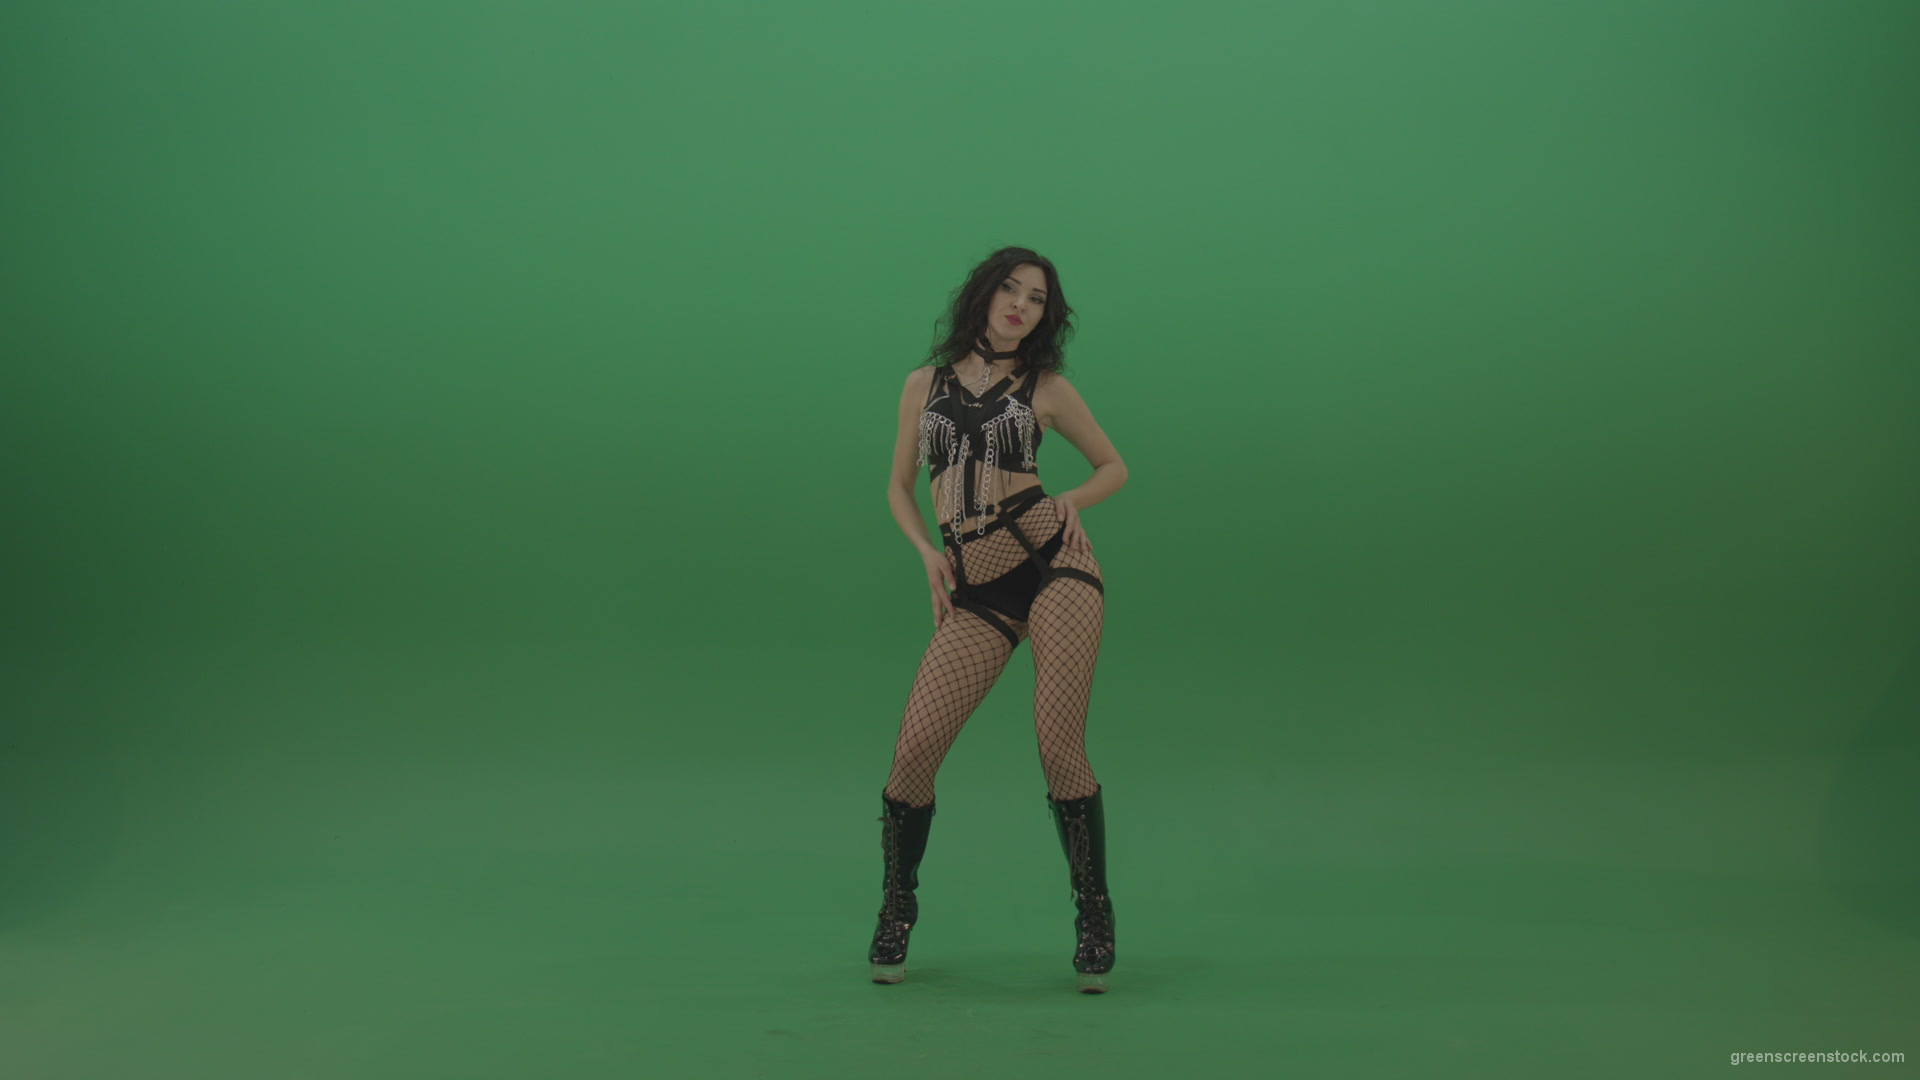 Pretty-black-haired-woman-in-an-erotic-suit-cycles-repetitive-movements-on-green-background._006 Green Screen Stock